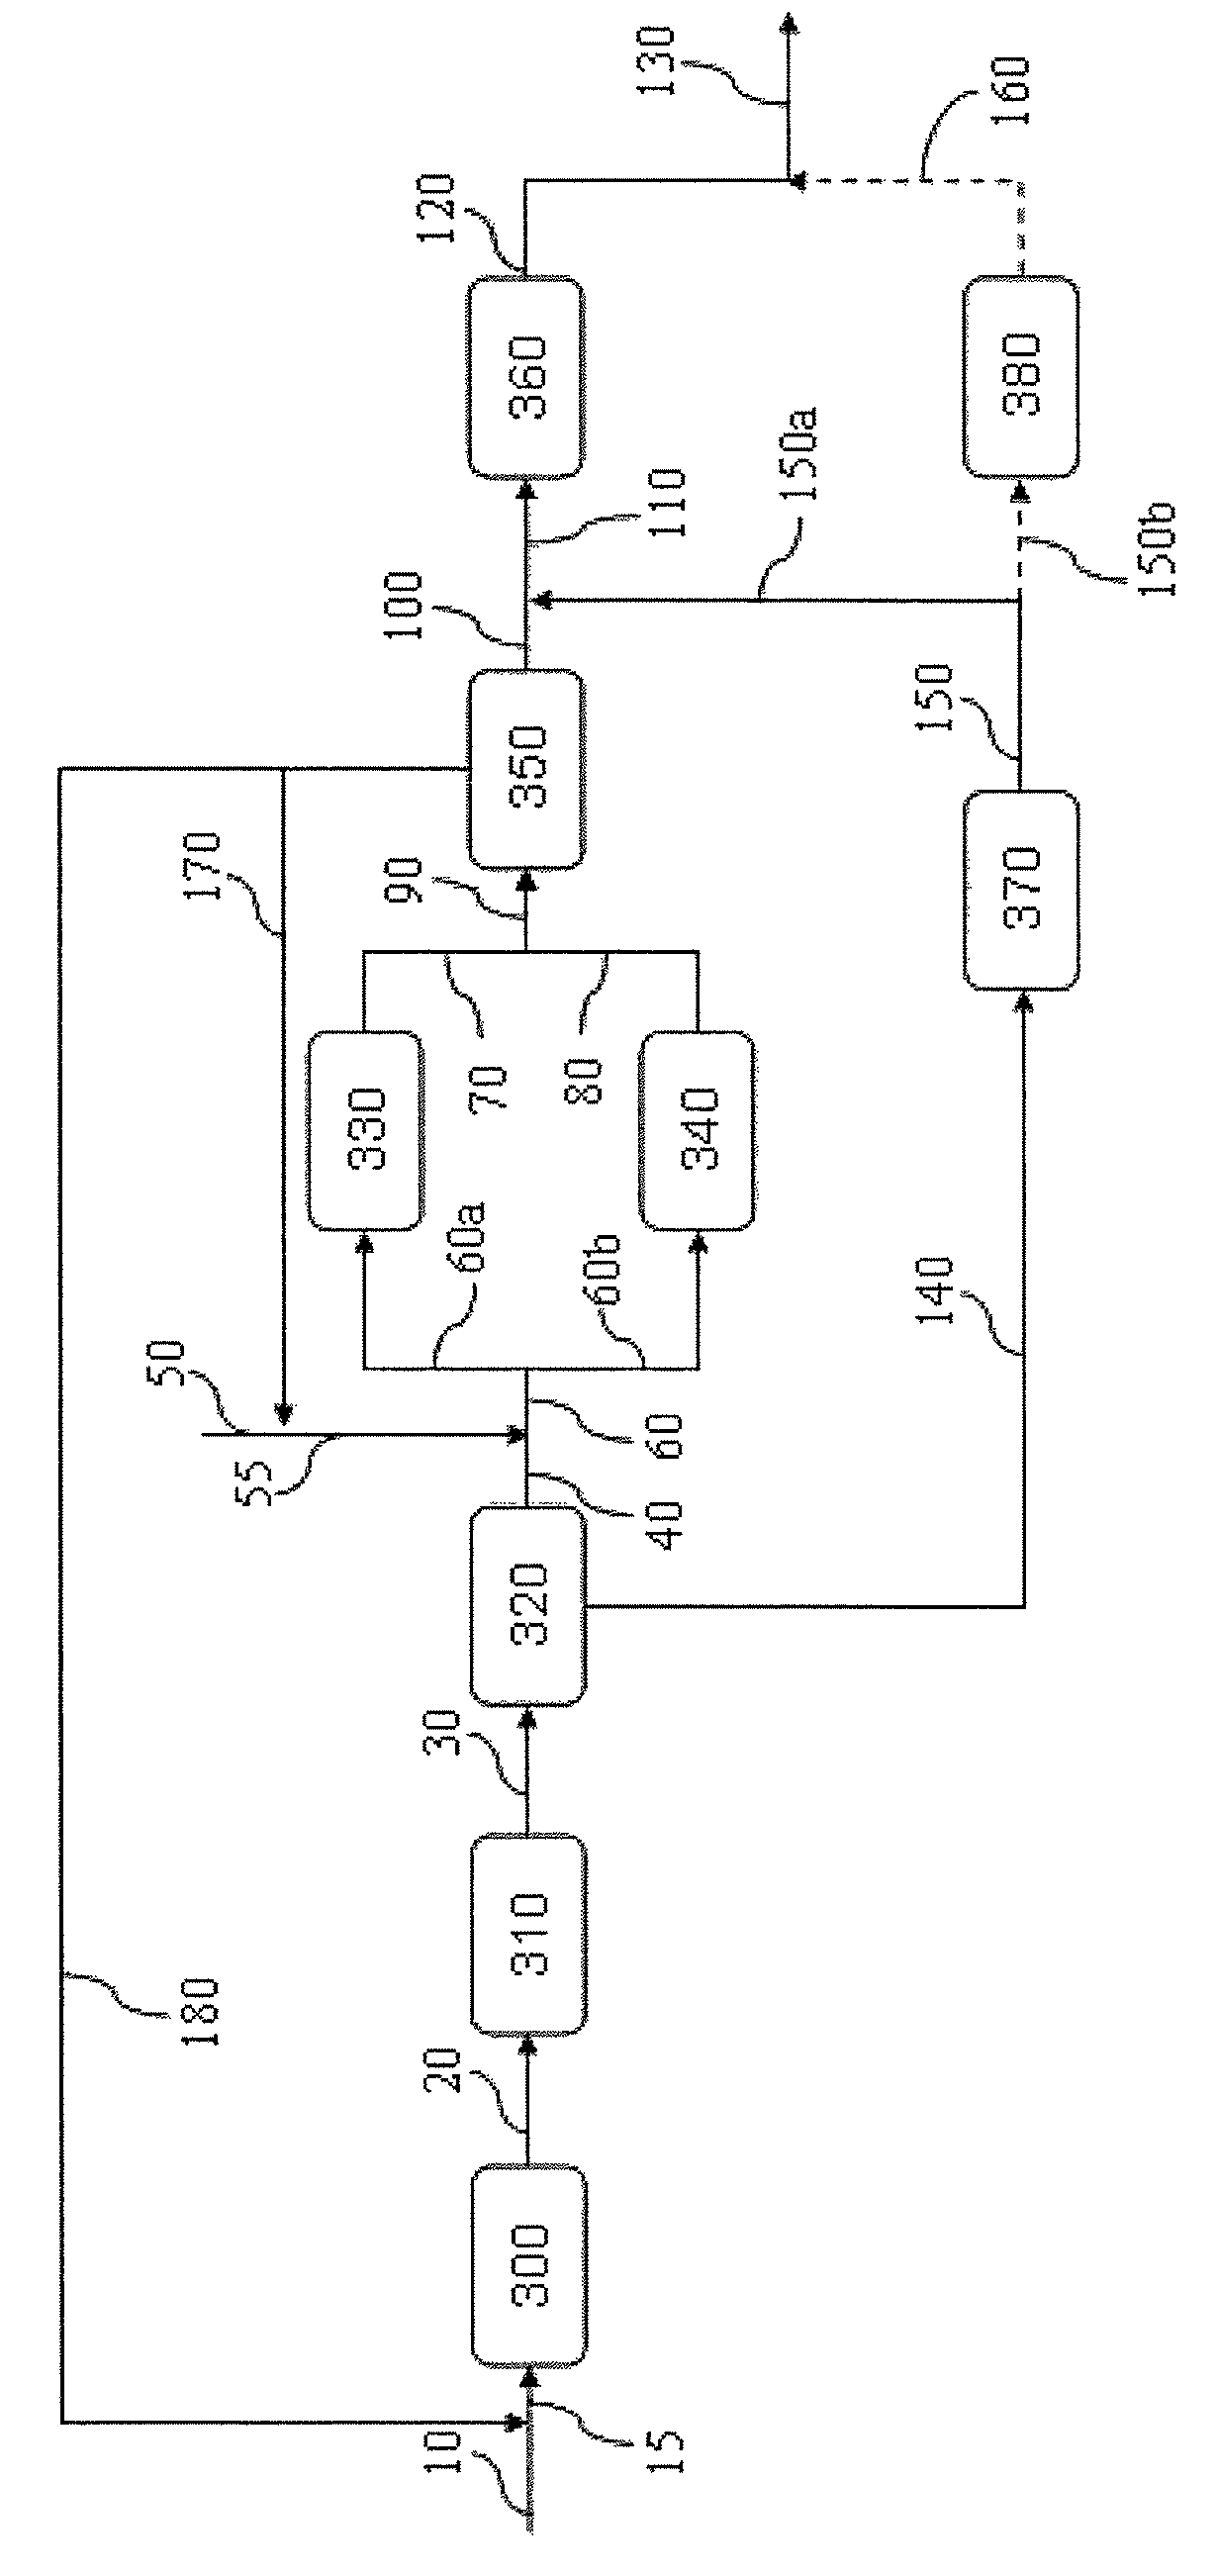 Process to obtain a highly soluble linear alkylbenzene sulfonate